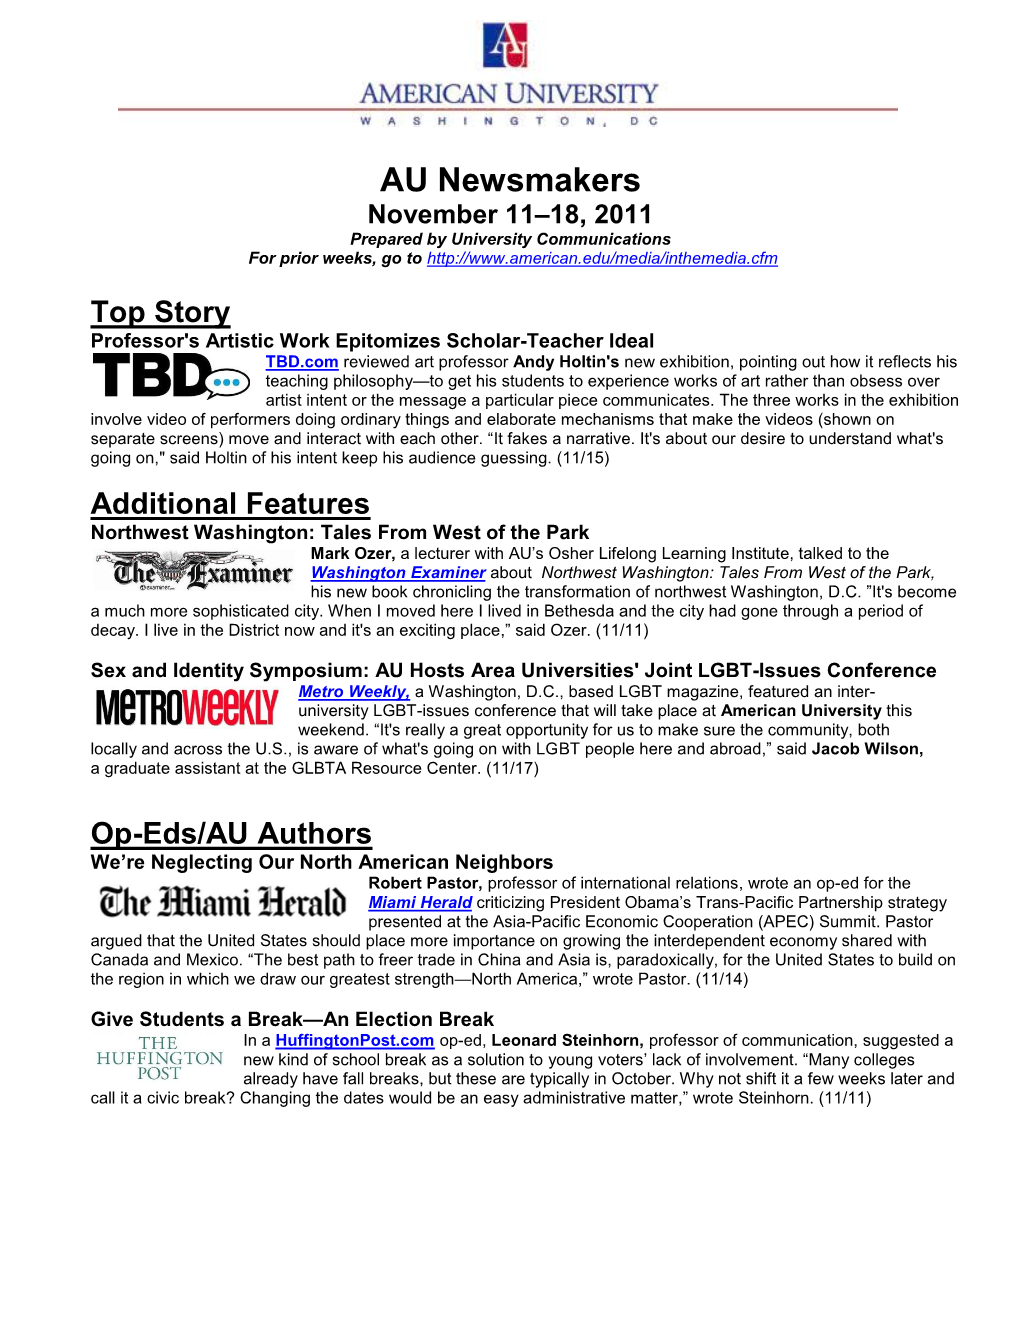 AU Newsmakers November 11–18, 2011 Prepared by University Communications for Prior Weeks, Go To